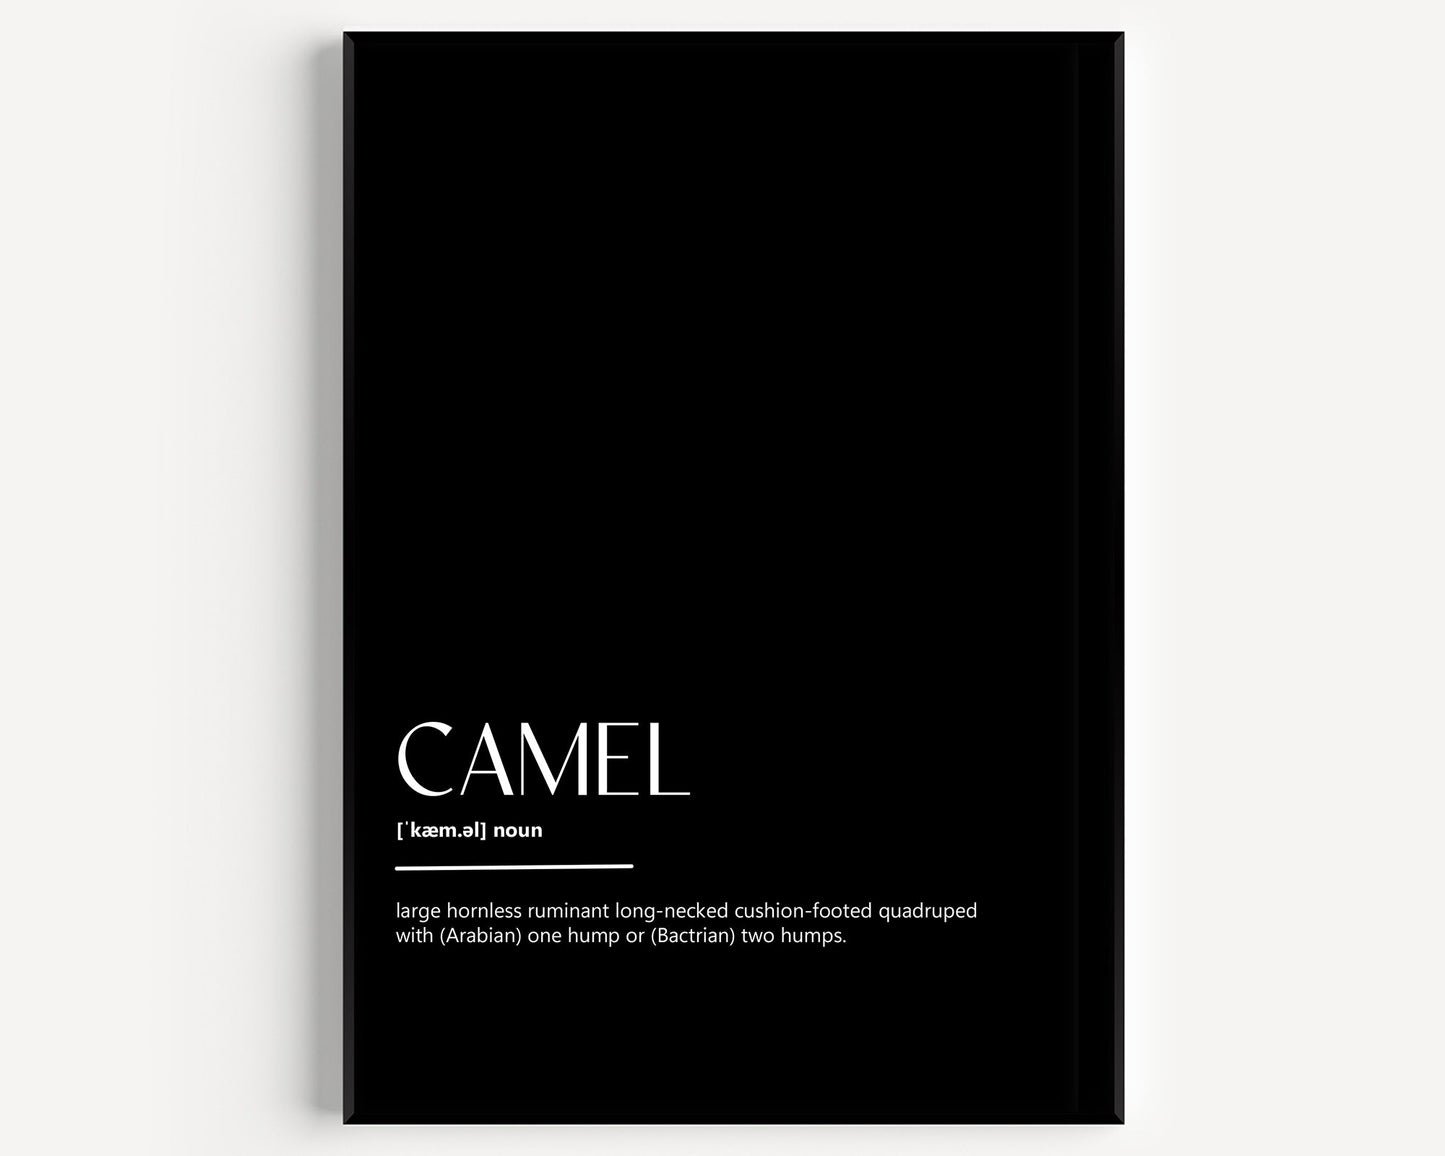 Camel Definition Print - Magic Posters